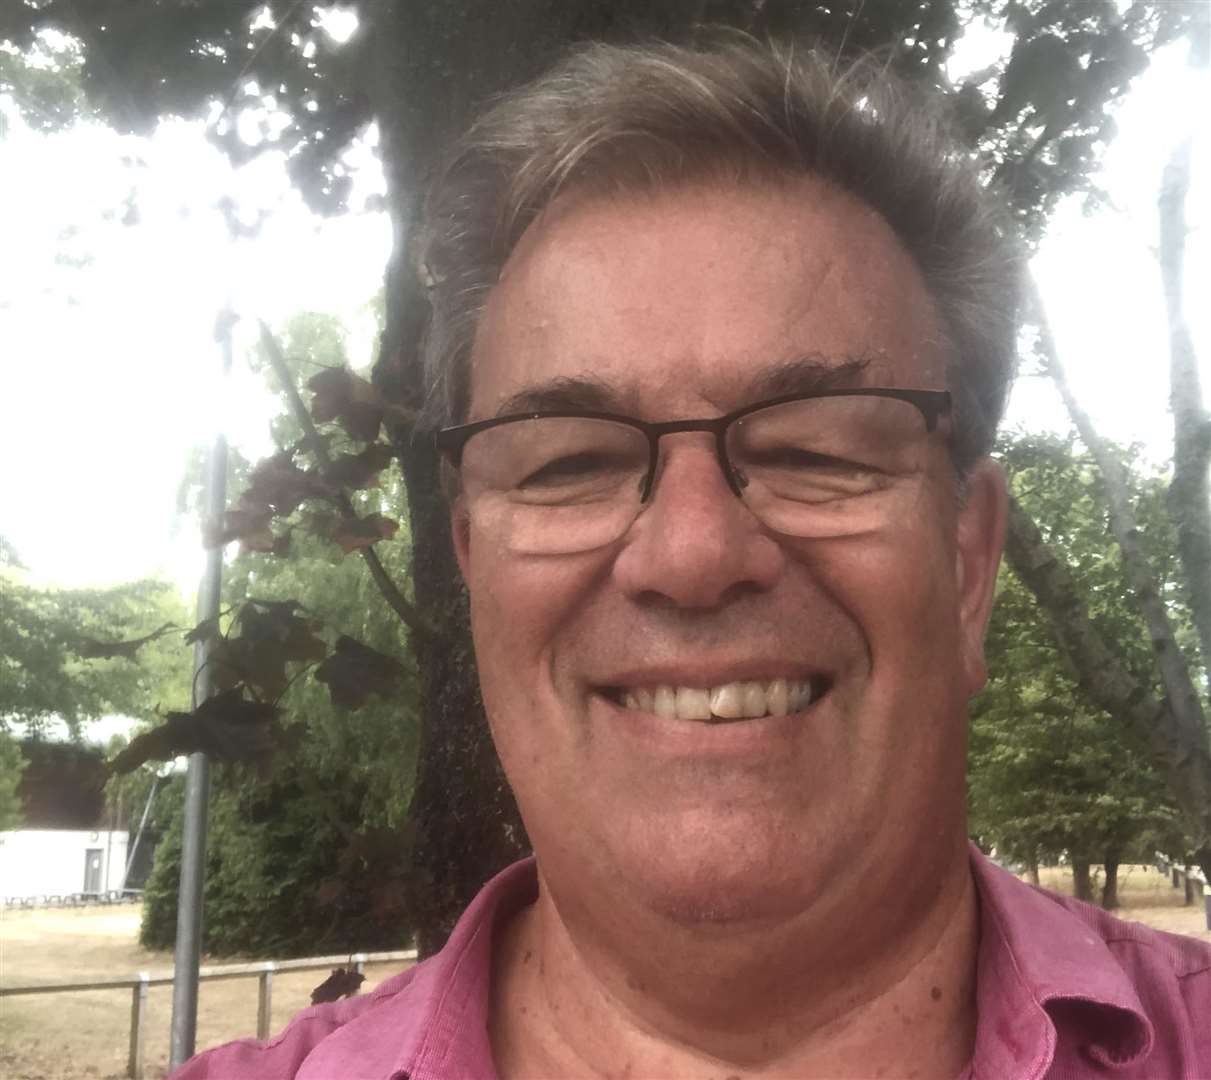 Alastair Deards, from Maidstone, was diagnosed with prostate cancer when he was 58